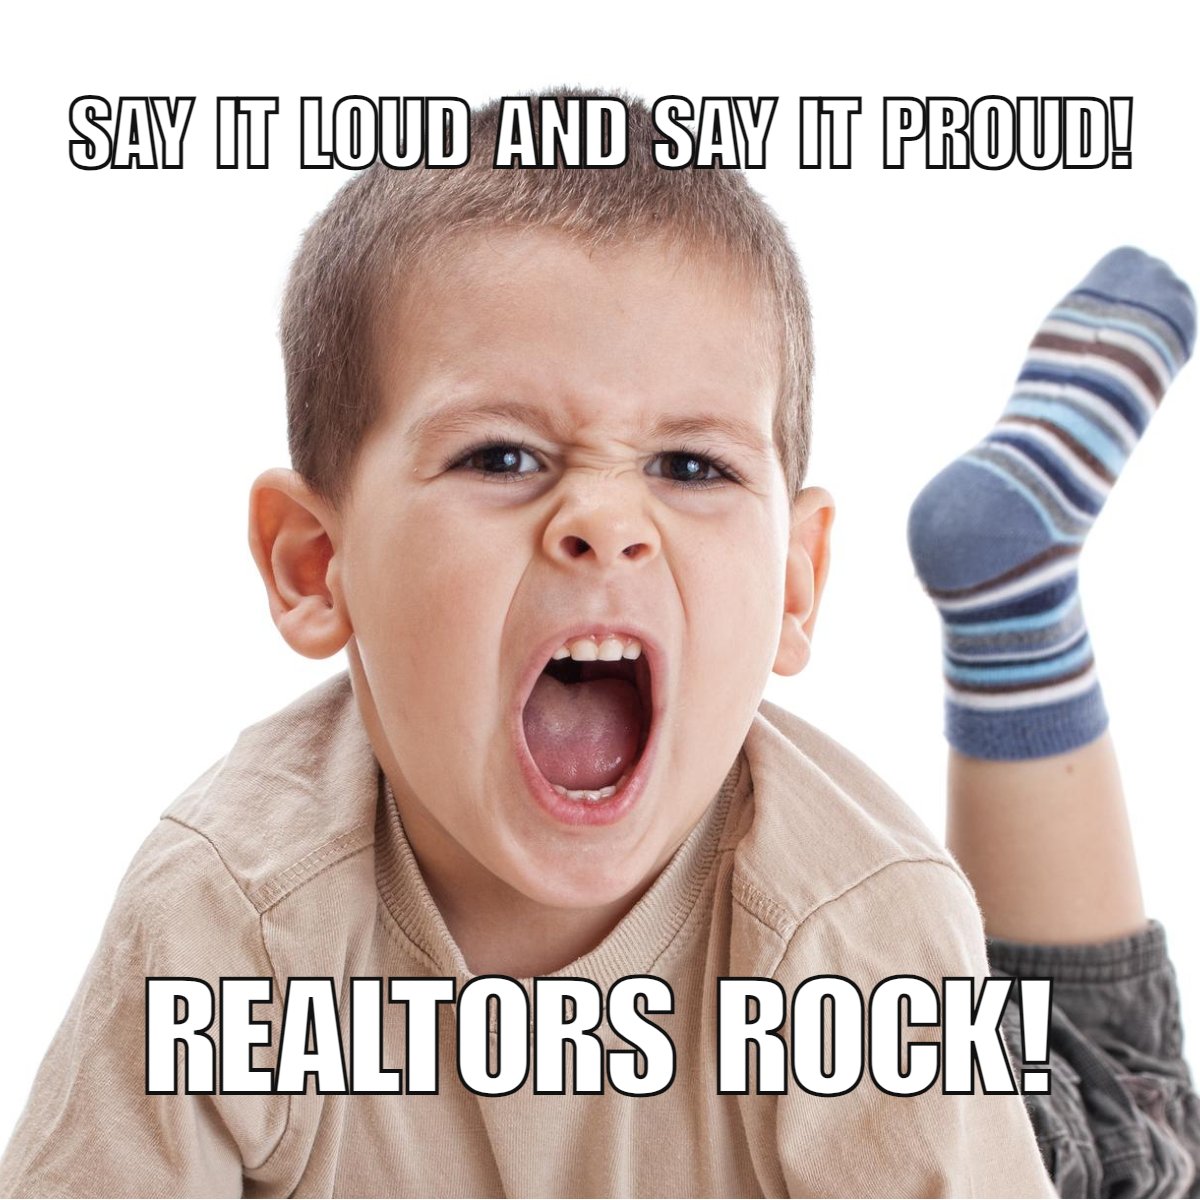 The unsung heroes of the real estate world!

Say it with me:

Realtors Rock!

 #RealEstateHeroes #HomeDreams
 #HomeForSale #SimiValleyHOmes #ThousandOaksHOmesforSale #MoorparkHomesForSale #VenturaCountyHomeForSale #CindyTothRealtor #EducateAndNEgotiate #CallMeFirst